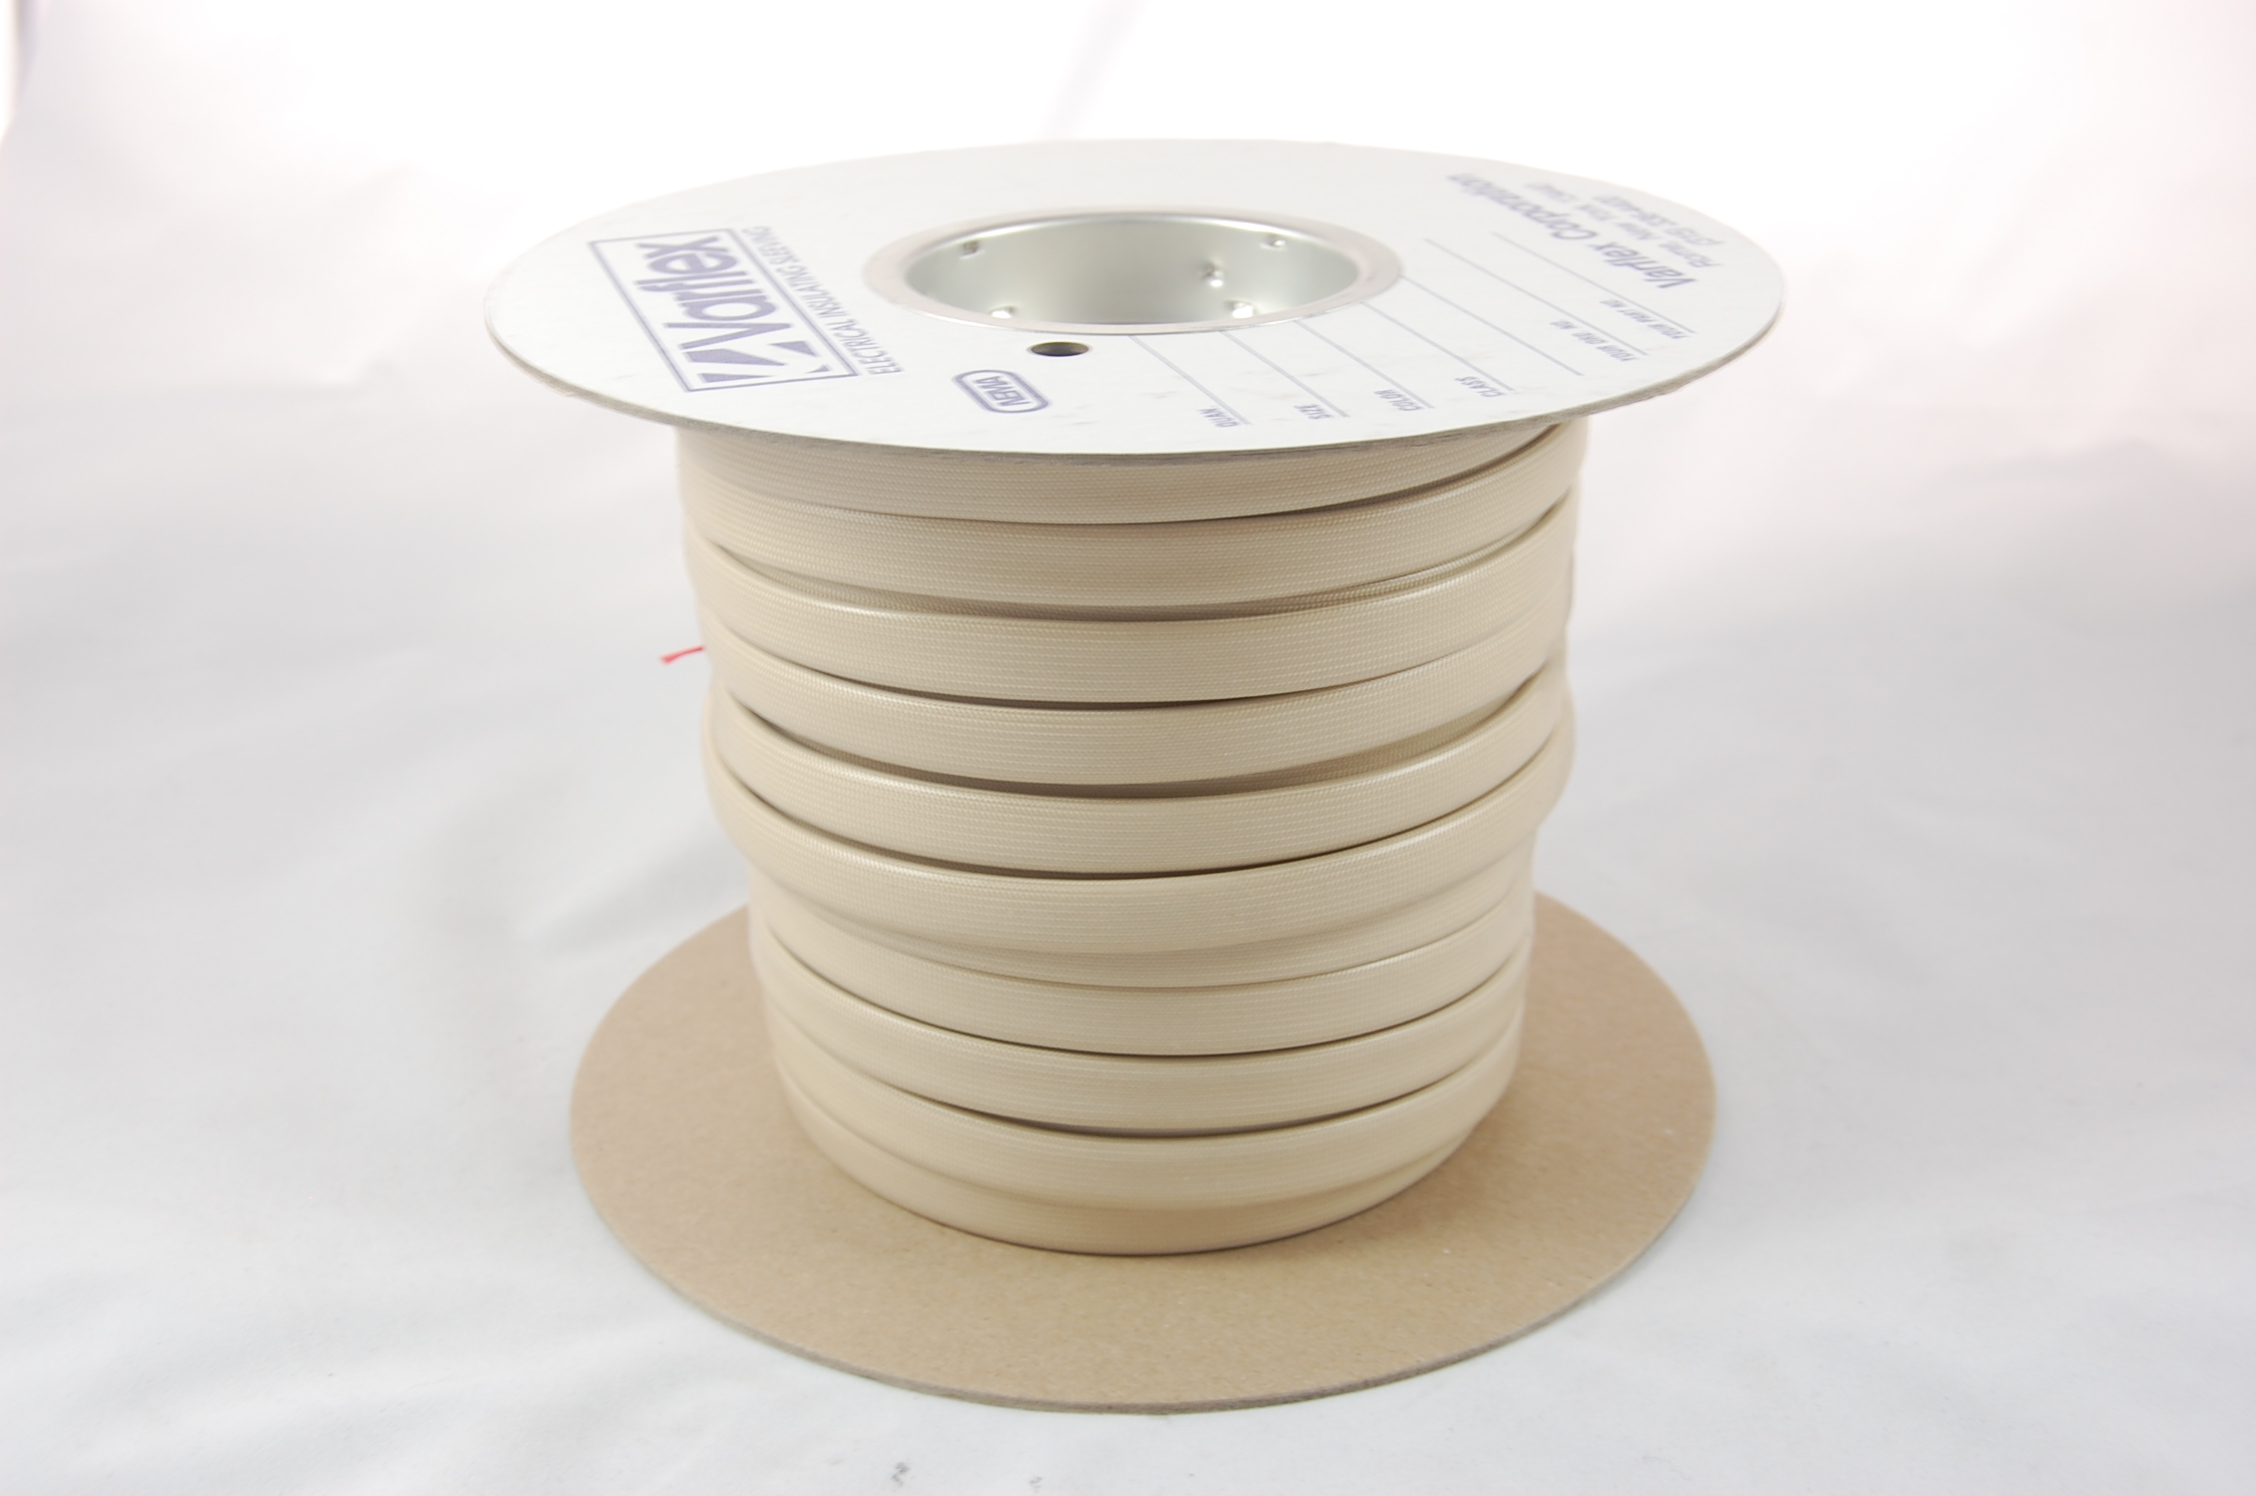 1" AWG Varglas Silicone Rubber Grade H-C-1 (2500V) High Temperature Silicone Rubber Coated Braided Fiberglass Sleeving 200°C, natural, 100 FT per spool